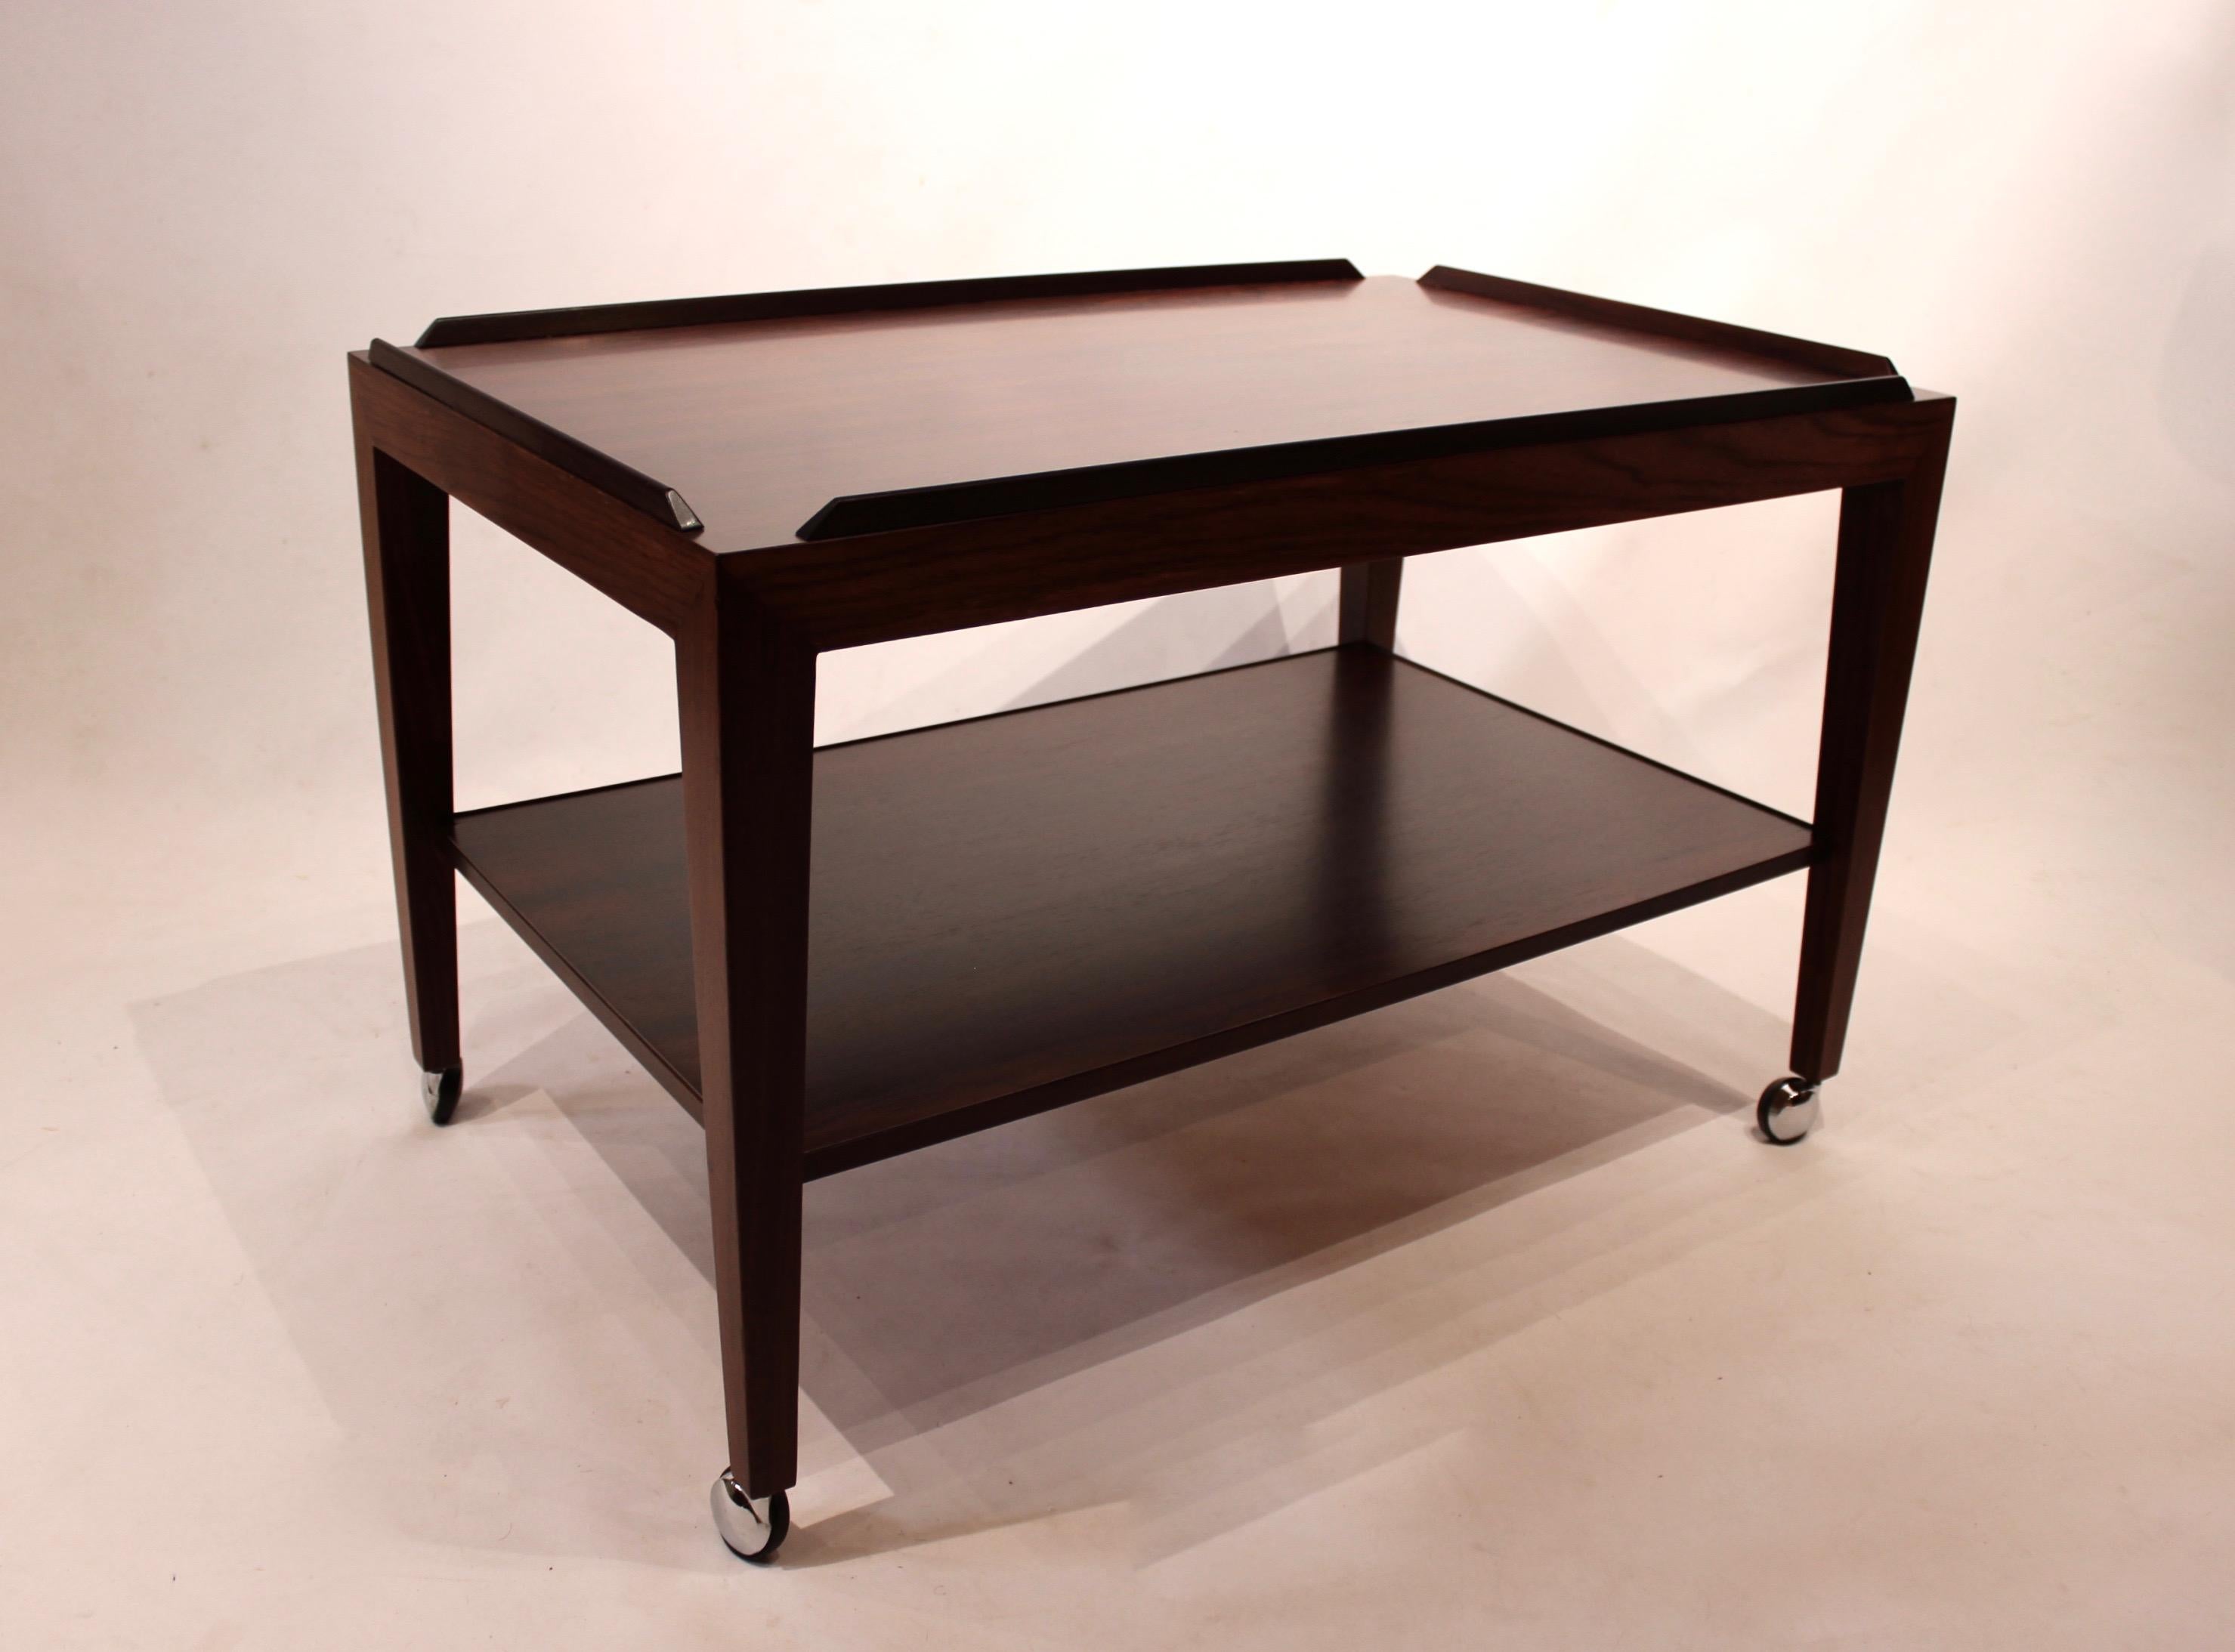 Table on wheels in rosewood by Severin Hansen and Haslev Furniture factory in the 1960s. The table is in great vintage condition.